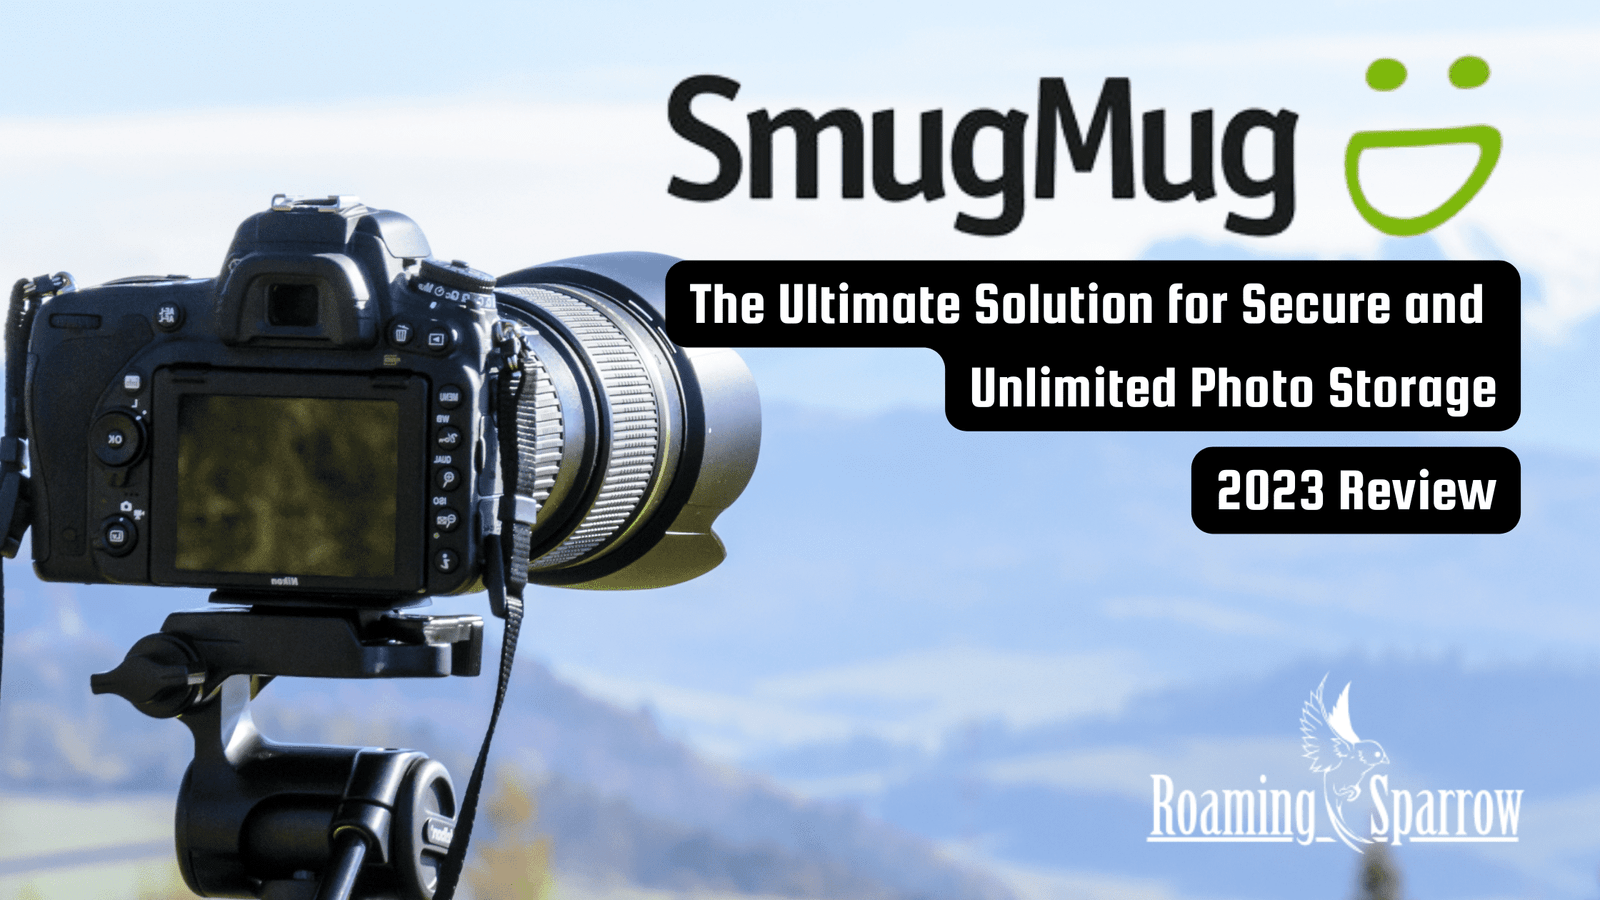 SmugMug: The Ultimate Solution for Secure and Unlimited Photo Storage